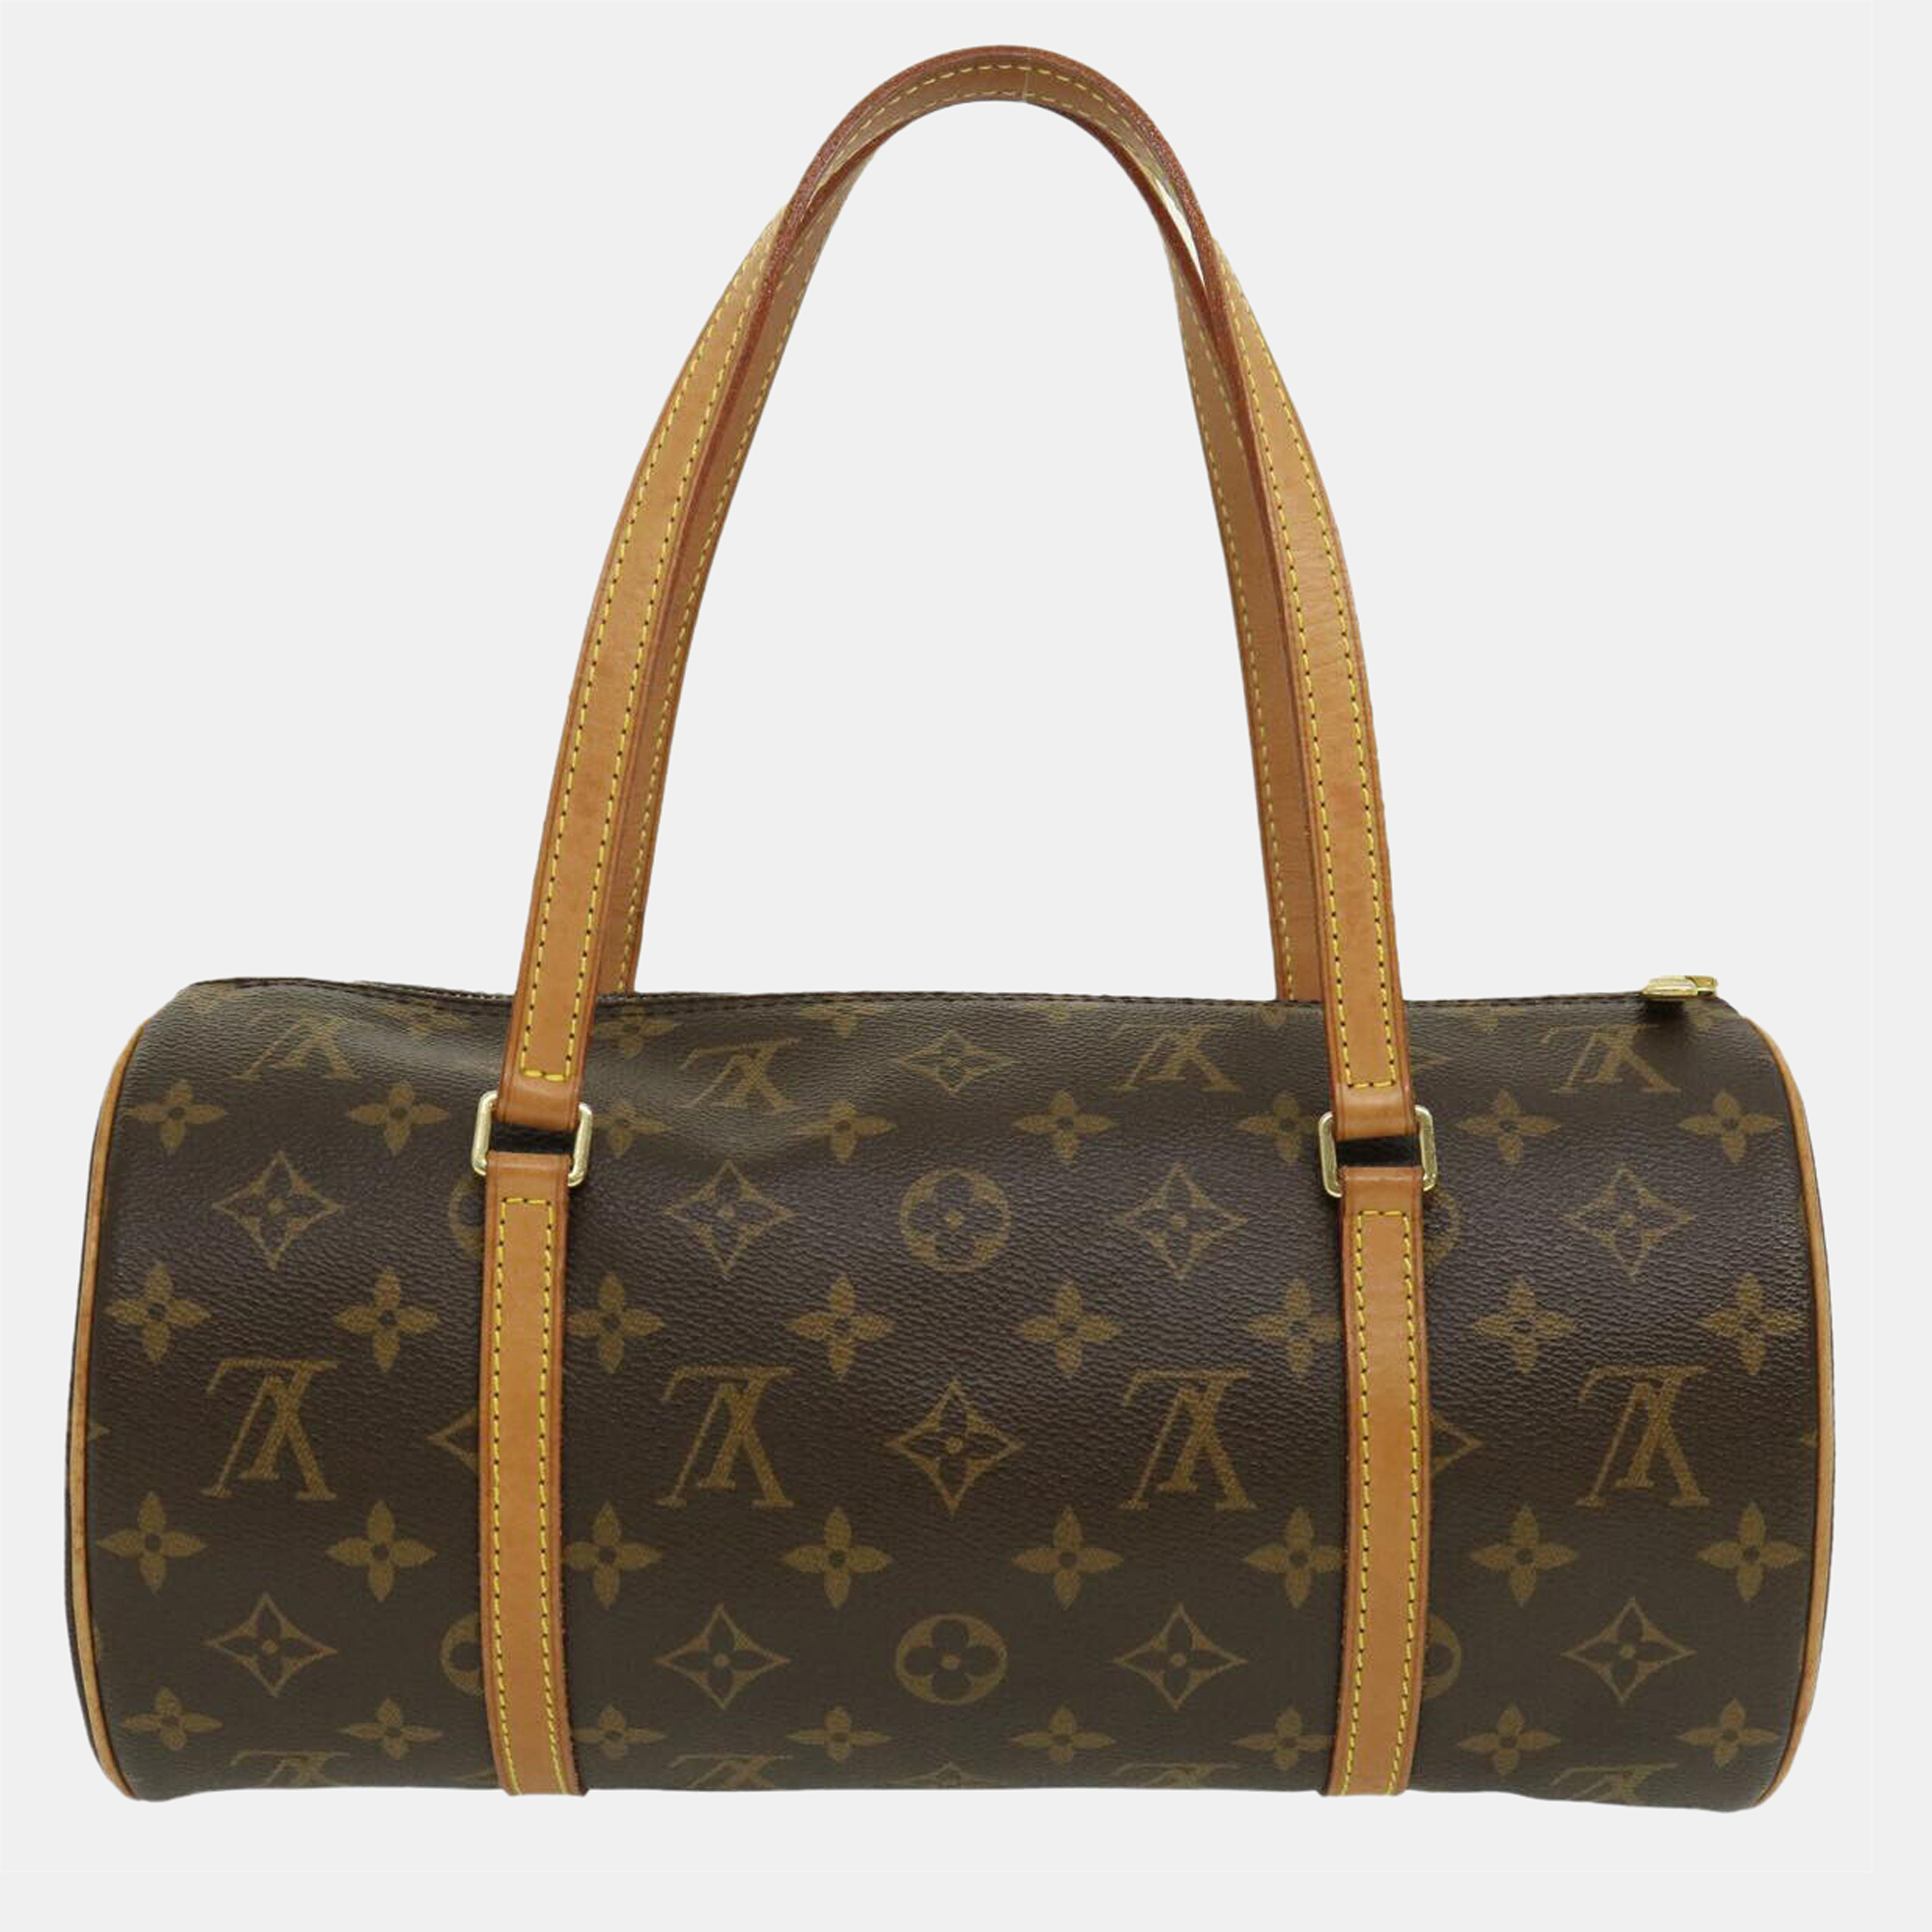 How to Buy a USED/Pre-owned Louis Vuitton